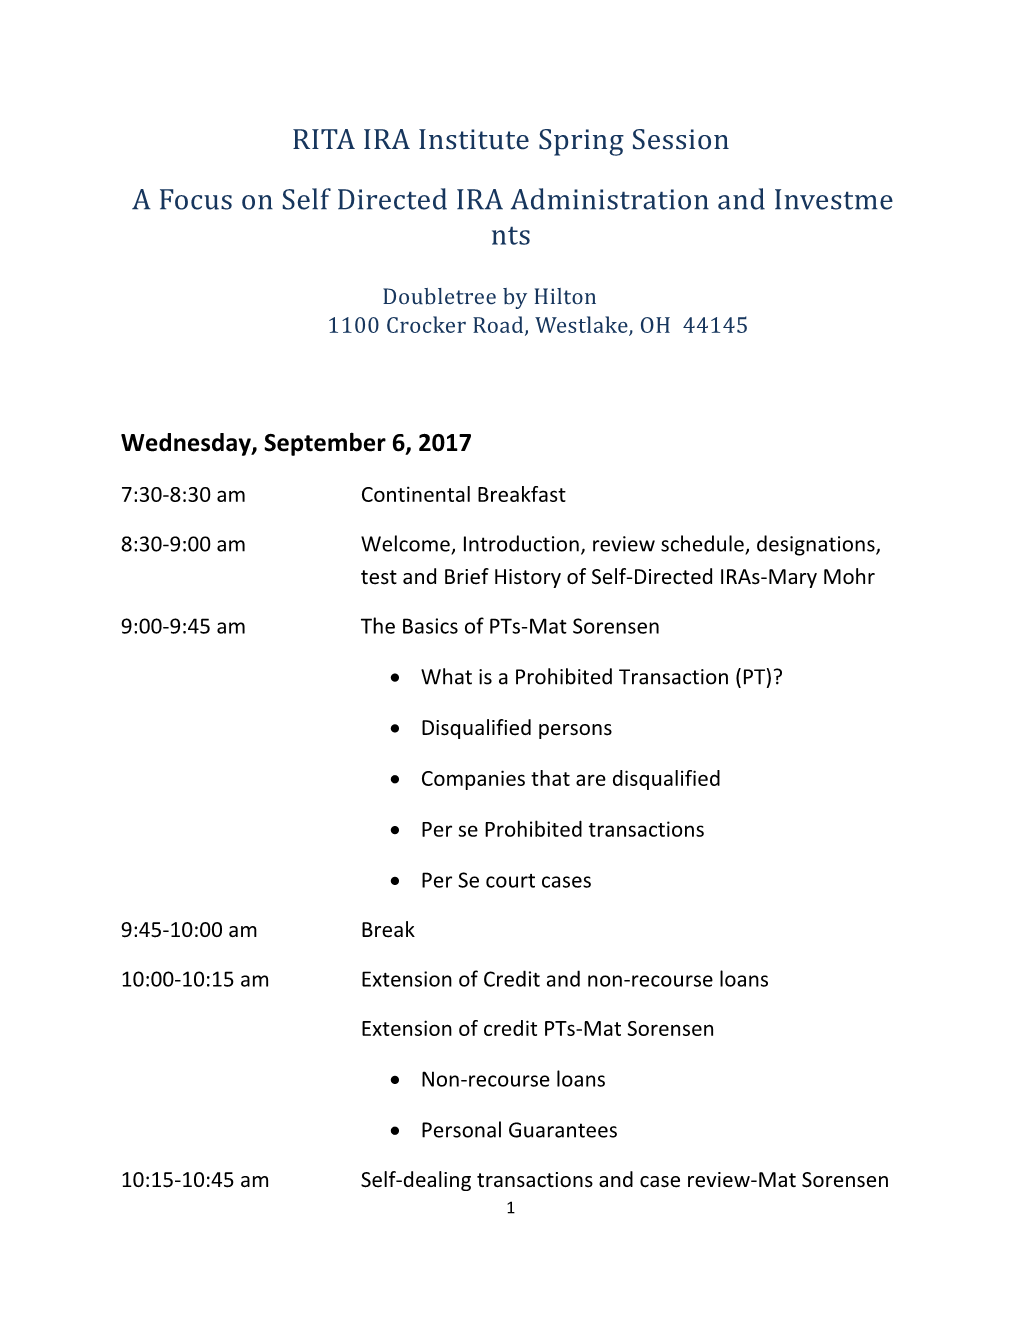 A Focus on Self Directed IRA Administration and Investments